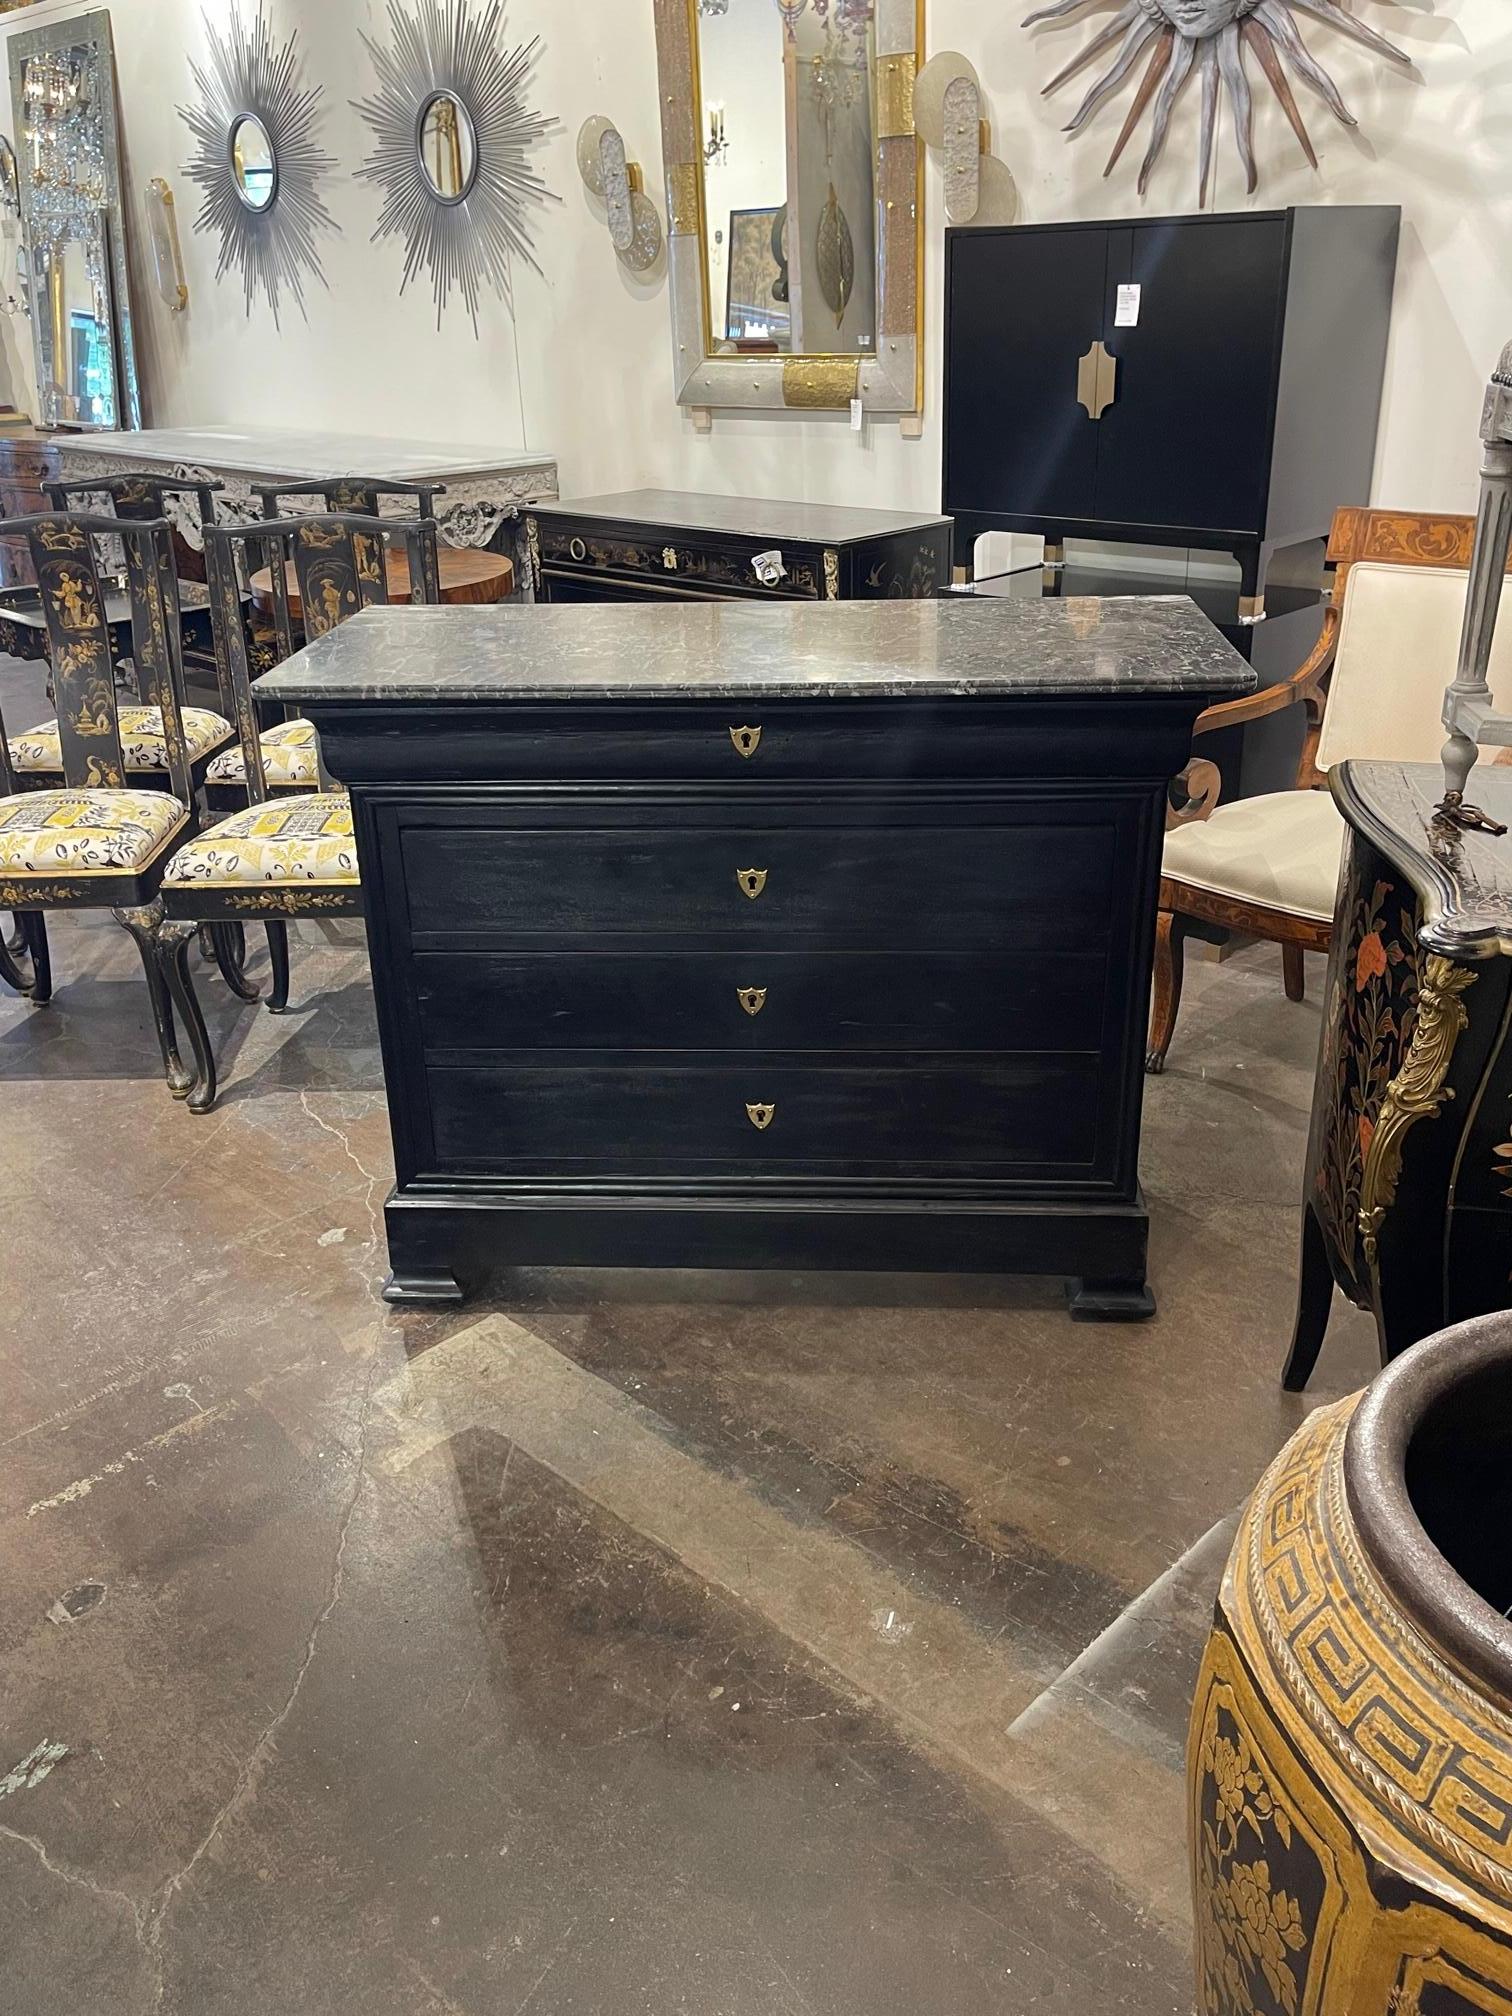 Gorgeous 19th century French Louis Philippe ebonized chest with a grey marble top. The piece has 4 drawers for storage as well. Lovely clean lines. So pretty!!